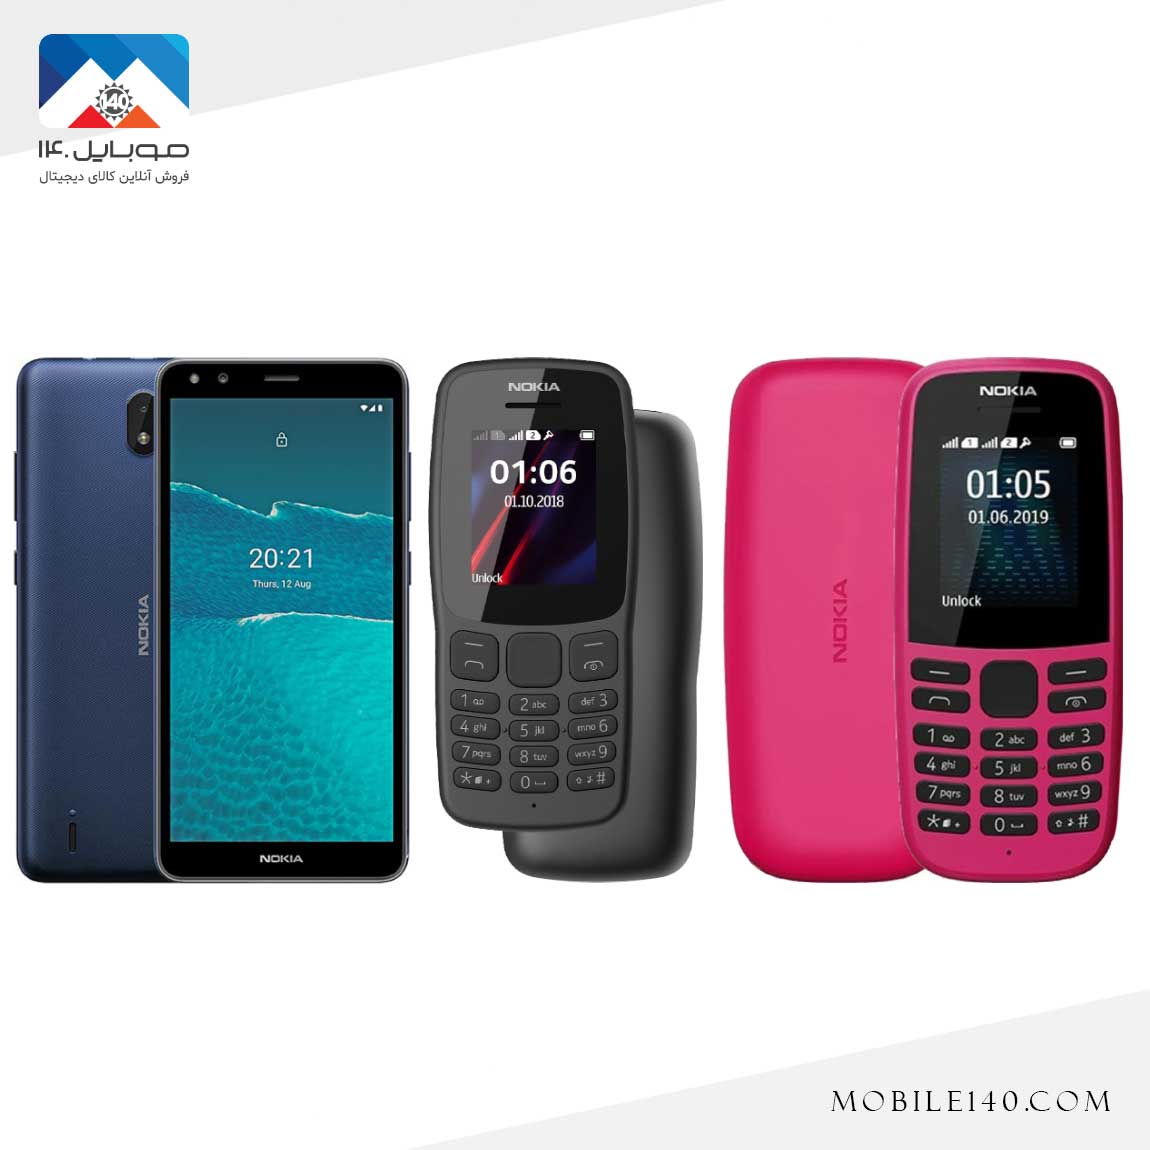 Nokia pack includes 1